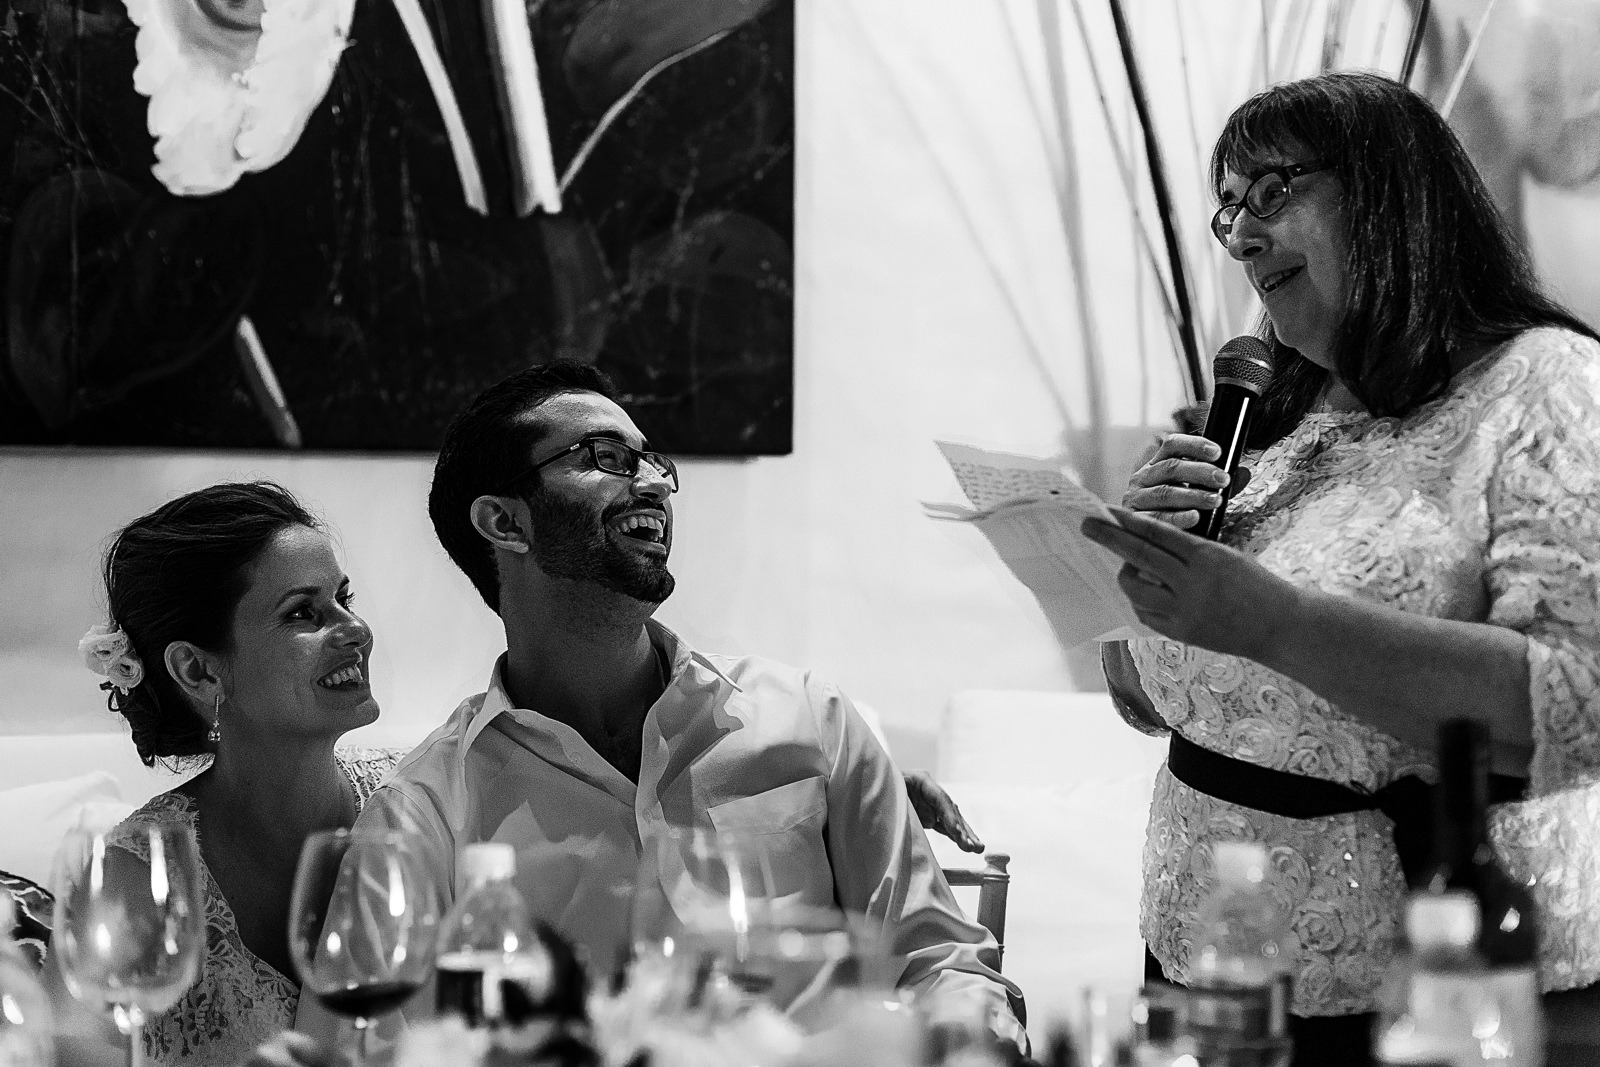 Mof the groom giving a speech, groom and bride laughing for said words